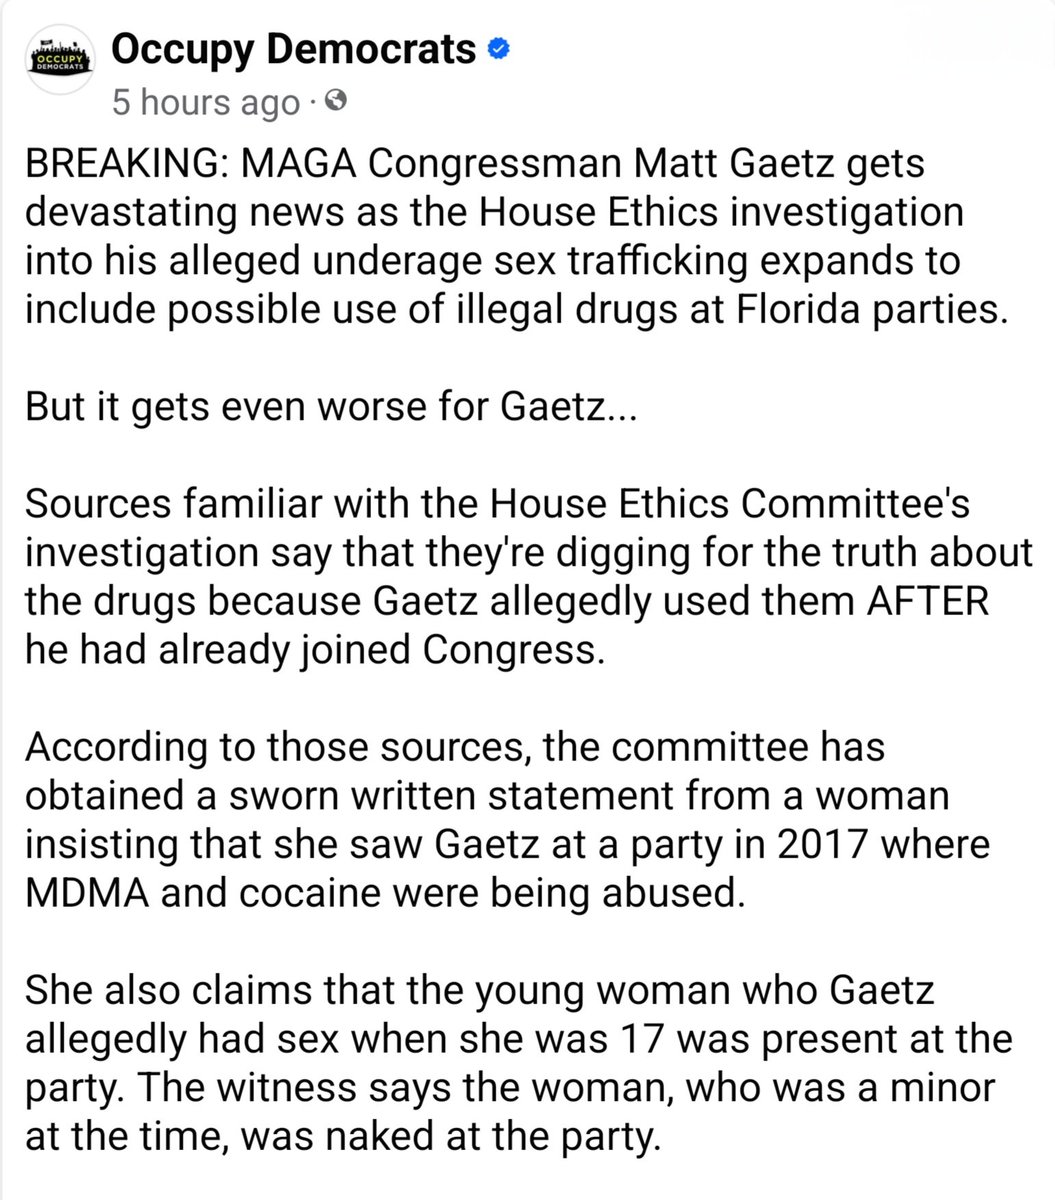 Uh-oh, @RepMattGaetz @mattgaetz you in trouble girl? I hope they bring your corrupt, Venmo paying, pedophile ass down!! 👇👇👇👇👇👇👇👇👇👇